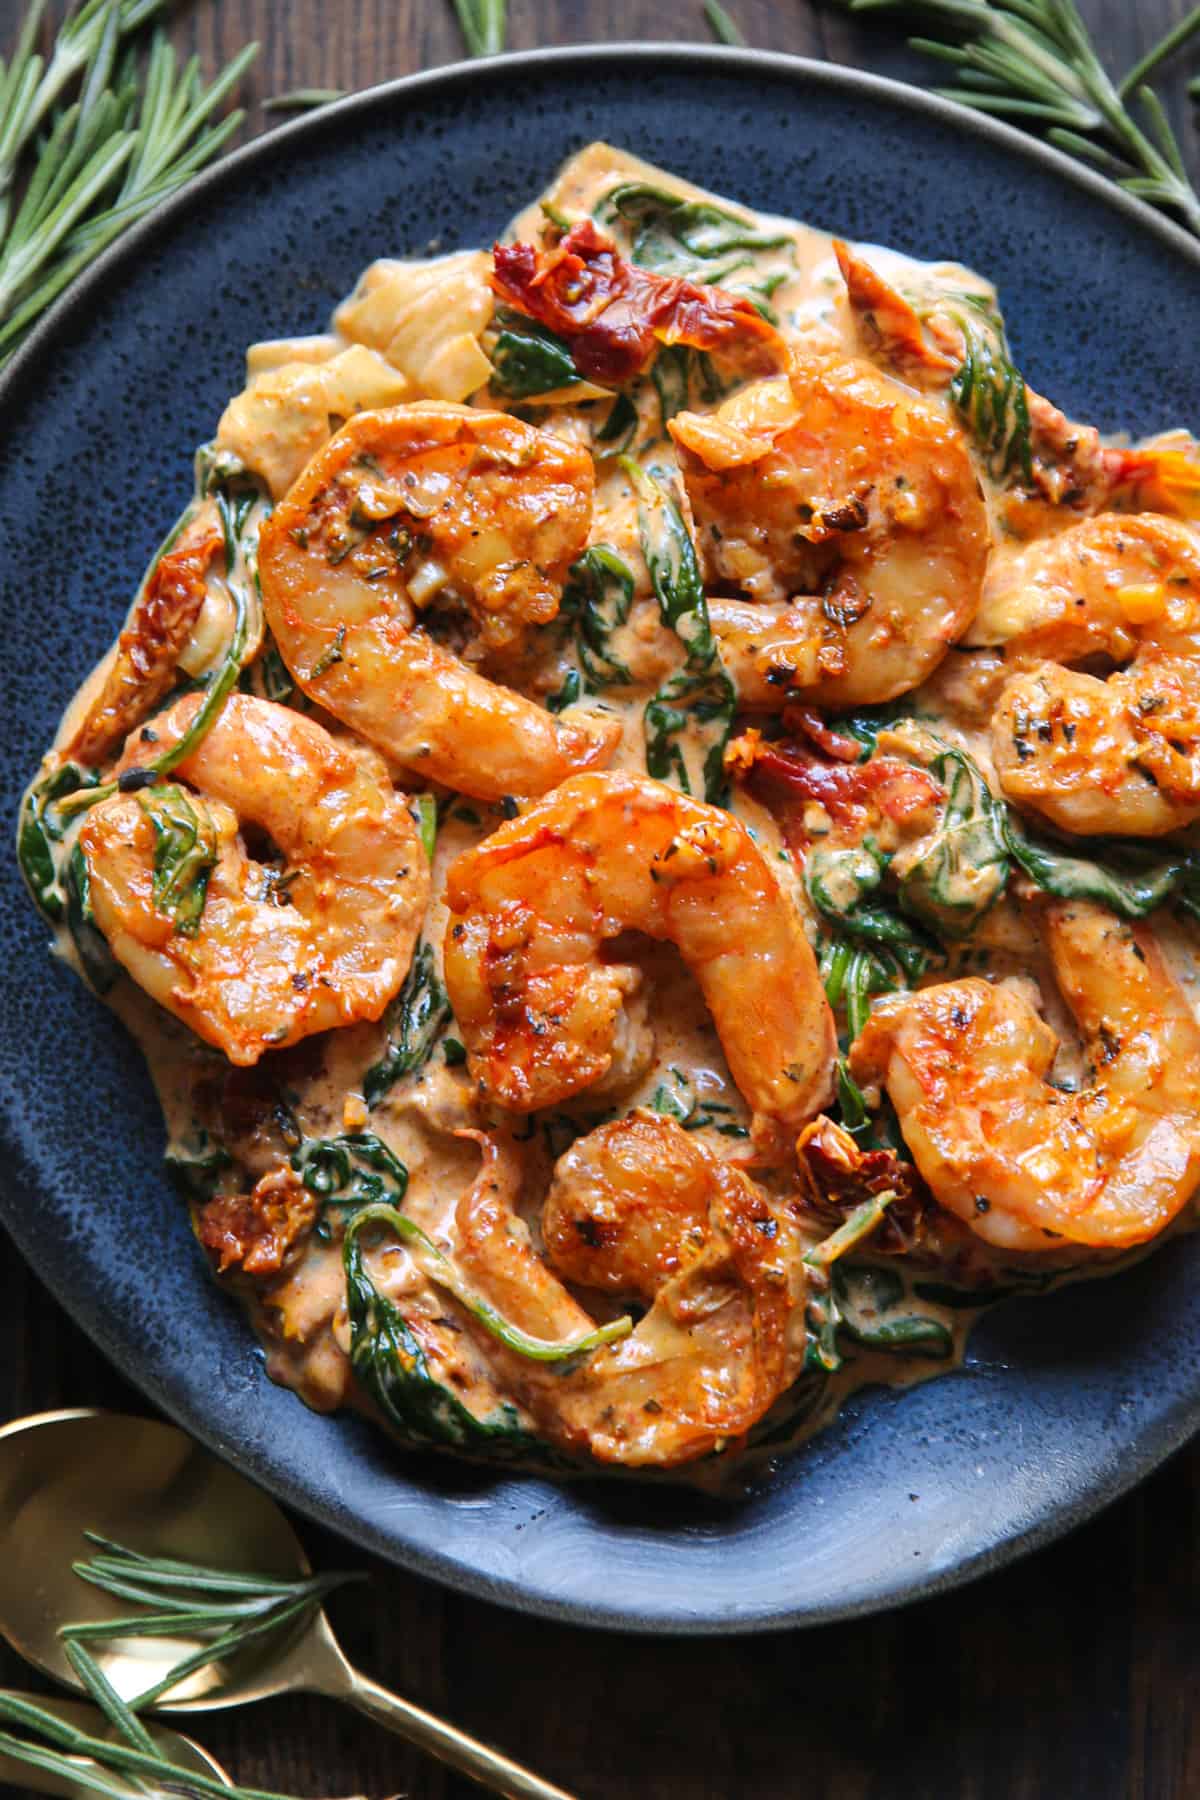 Creamy Tuscan Shrimp with Sun-Dried Tomatoes, Spinach, and Artichokes - on a blue plate.